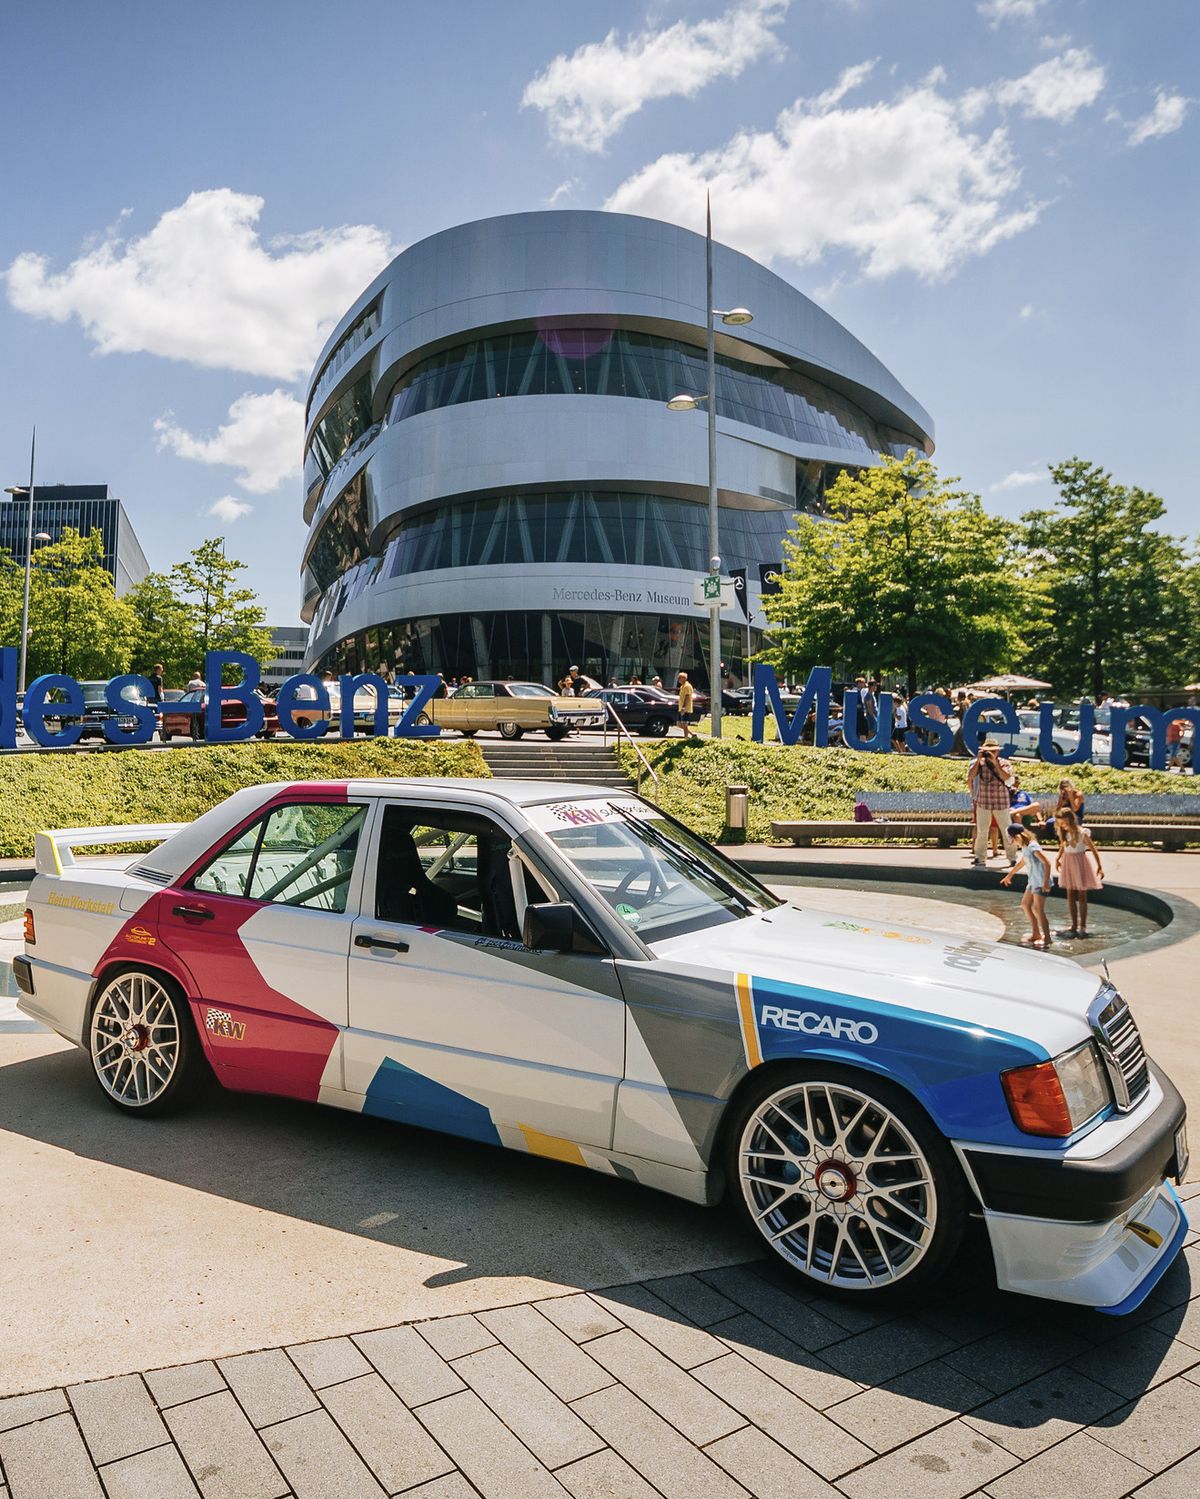 Classics & Coffee at the Mercedes-Benz Museum - "Baby Benz" Special